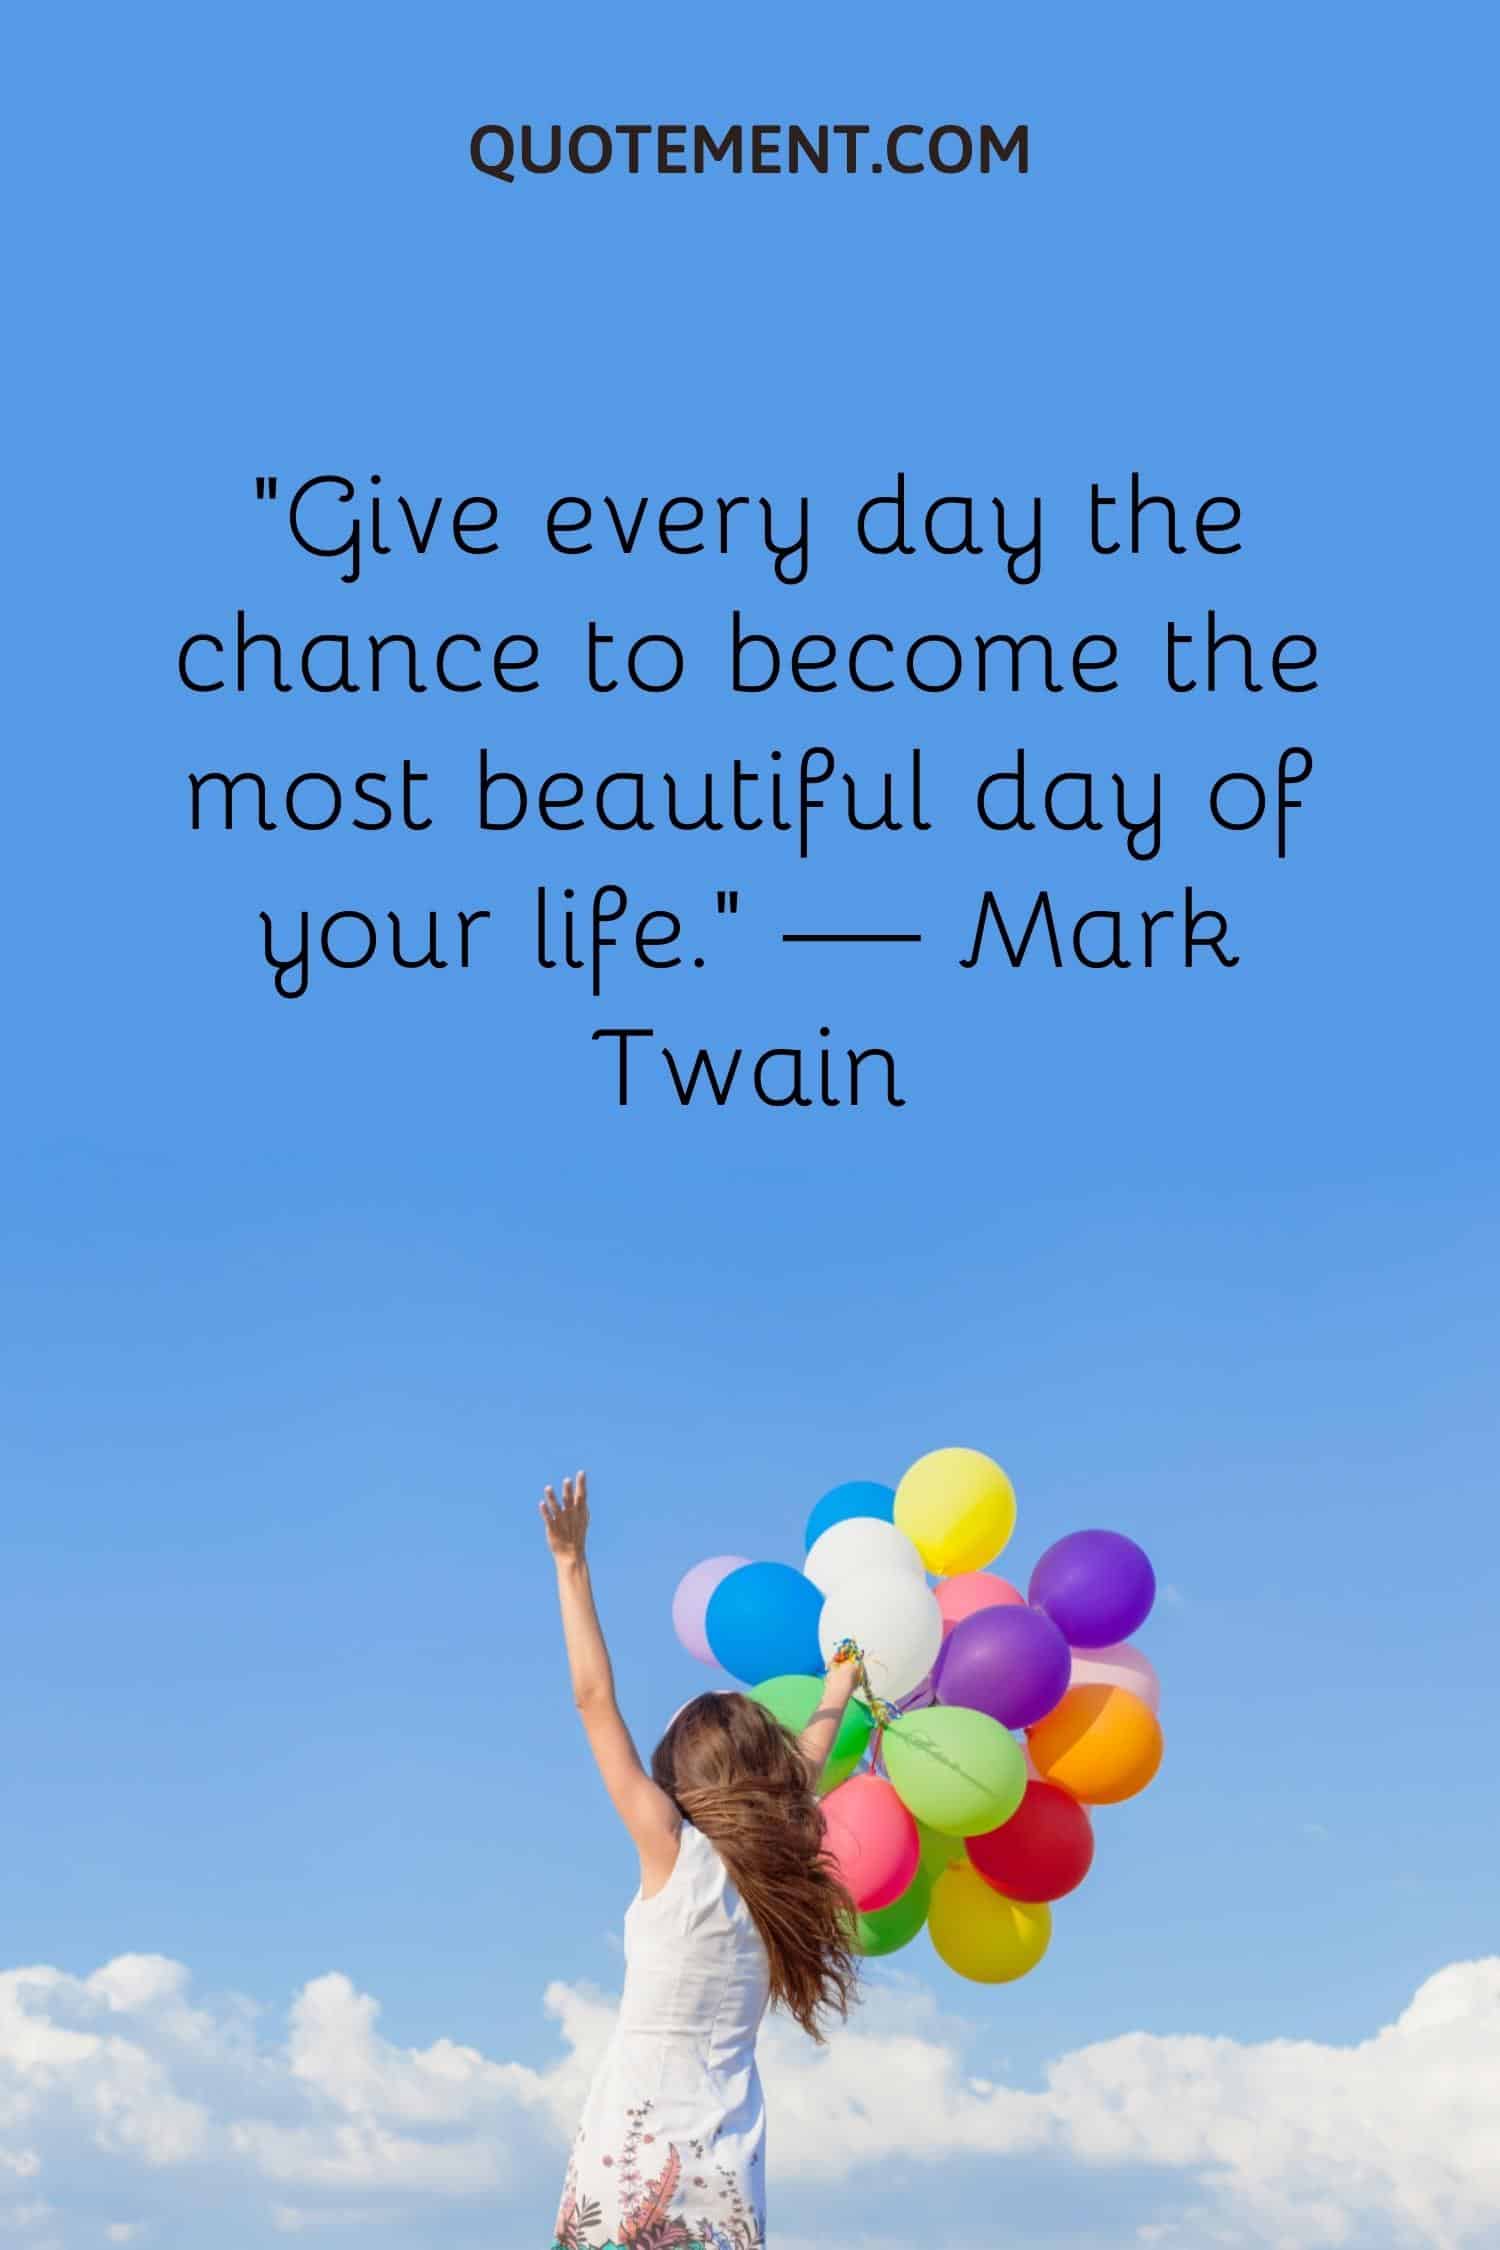 Give every day the chance to become the most beautiful day of your life